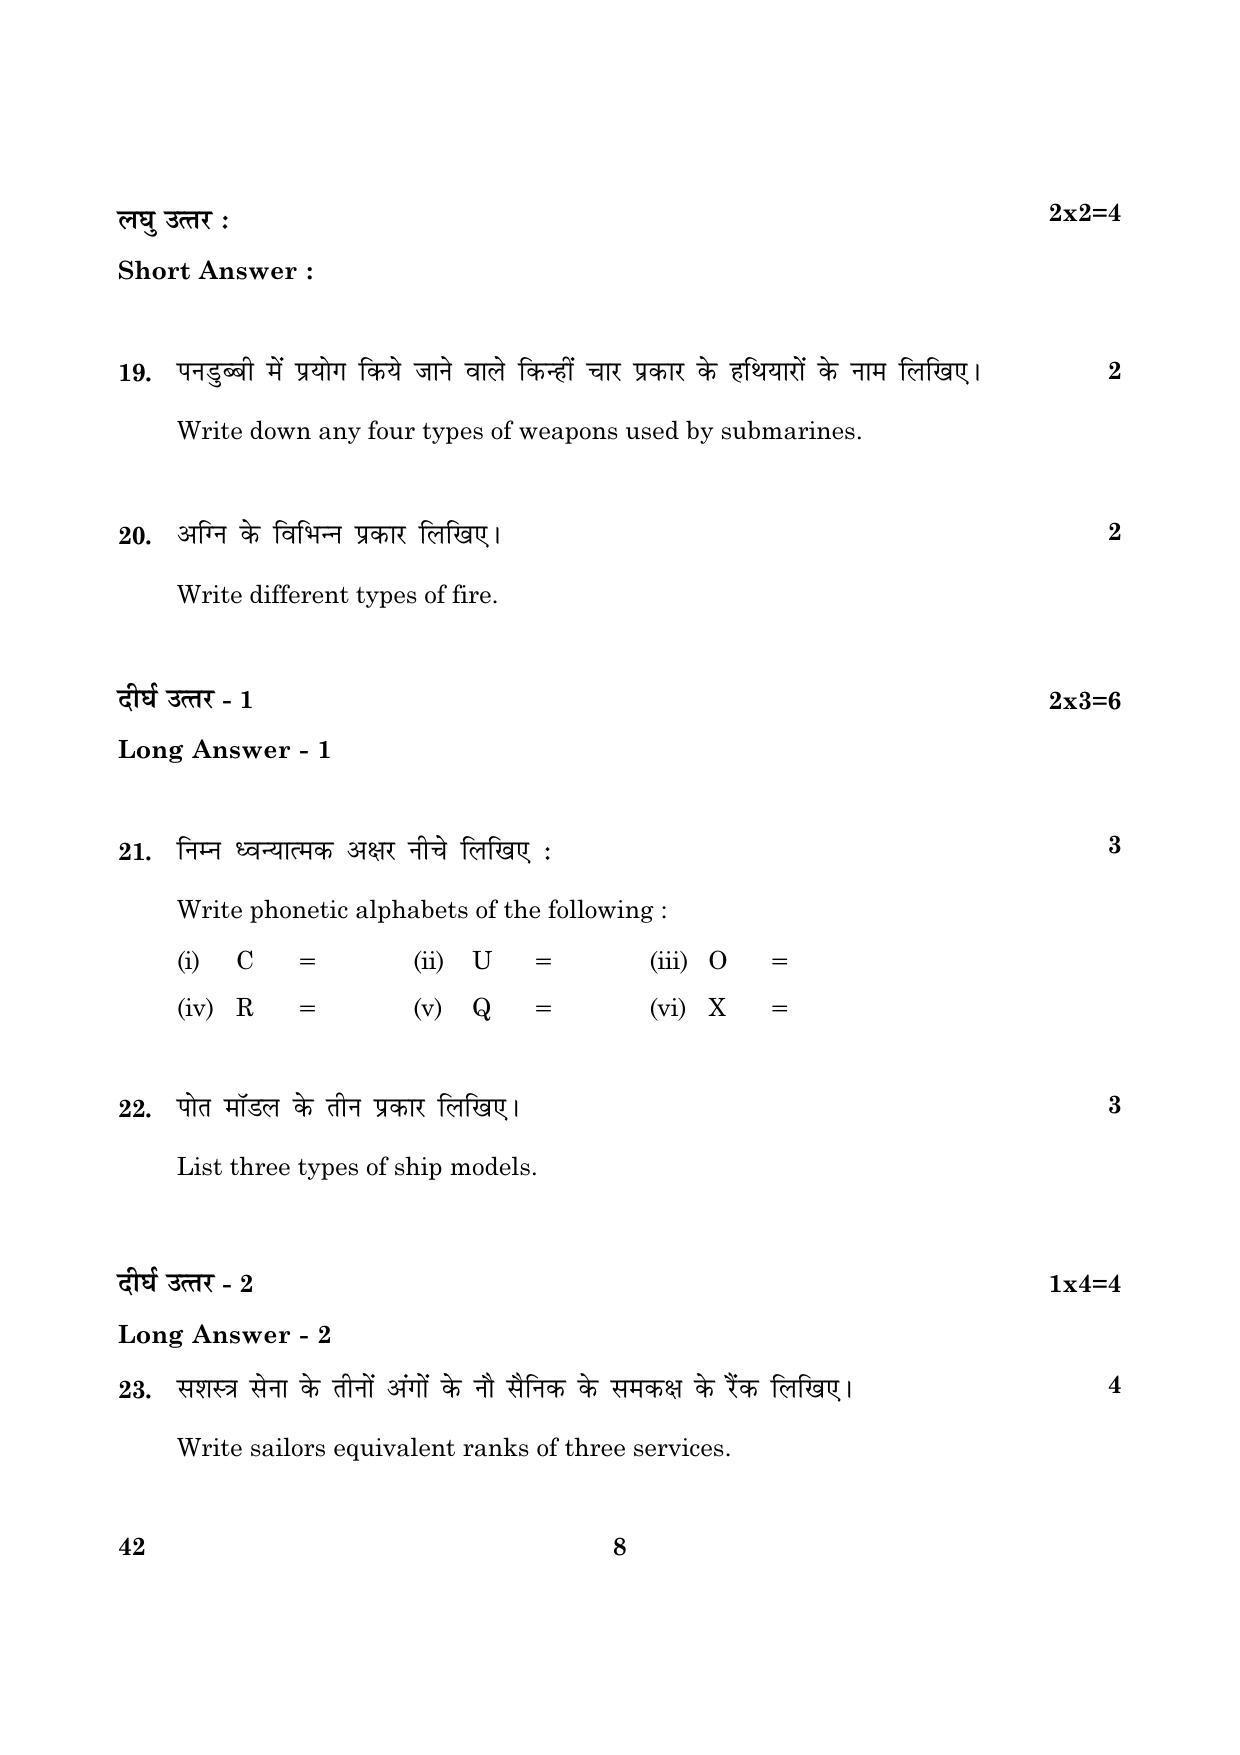 CBSE Class 12 042 National Cadet Corps (NCC) 2016 Question Paper - Page 8